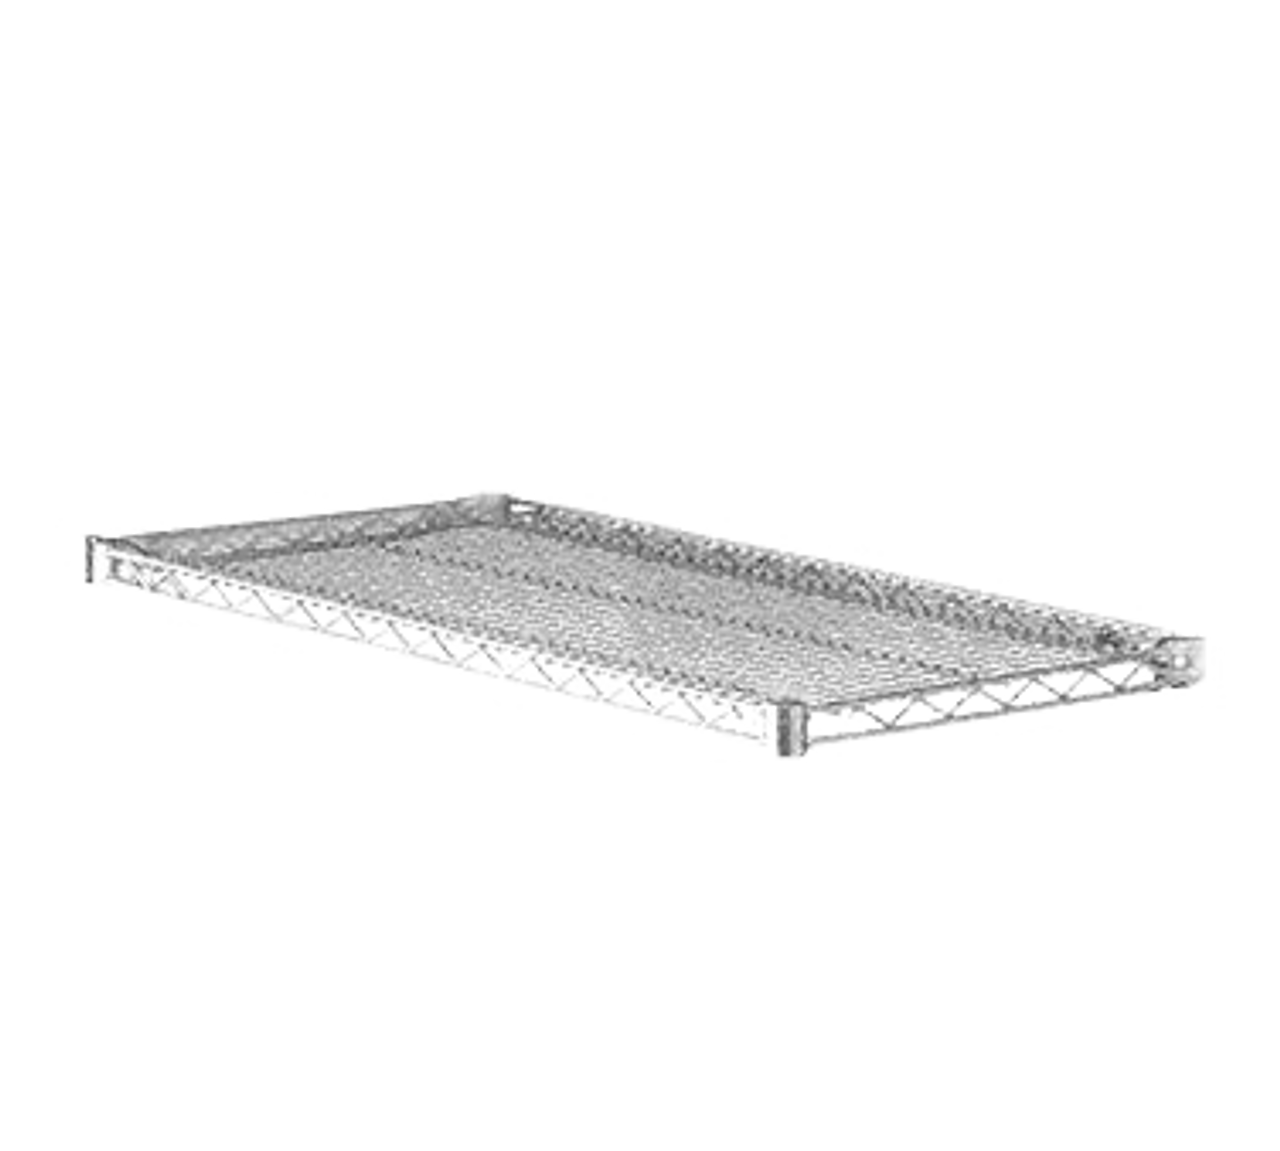 Super Erecta® Shelf, wire, 60"W x 24"D, stainless steel finish, plastic split sleeves are included in each carton, NSF